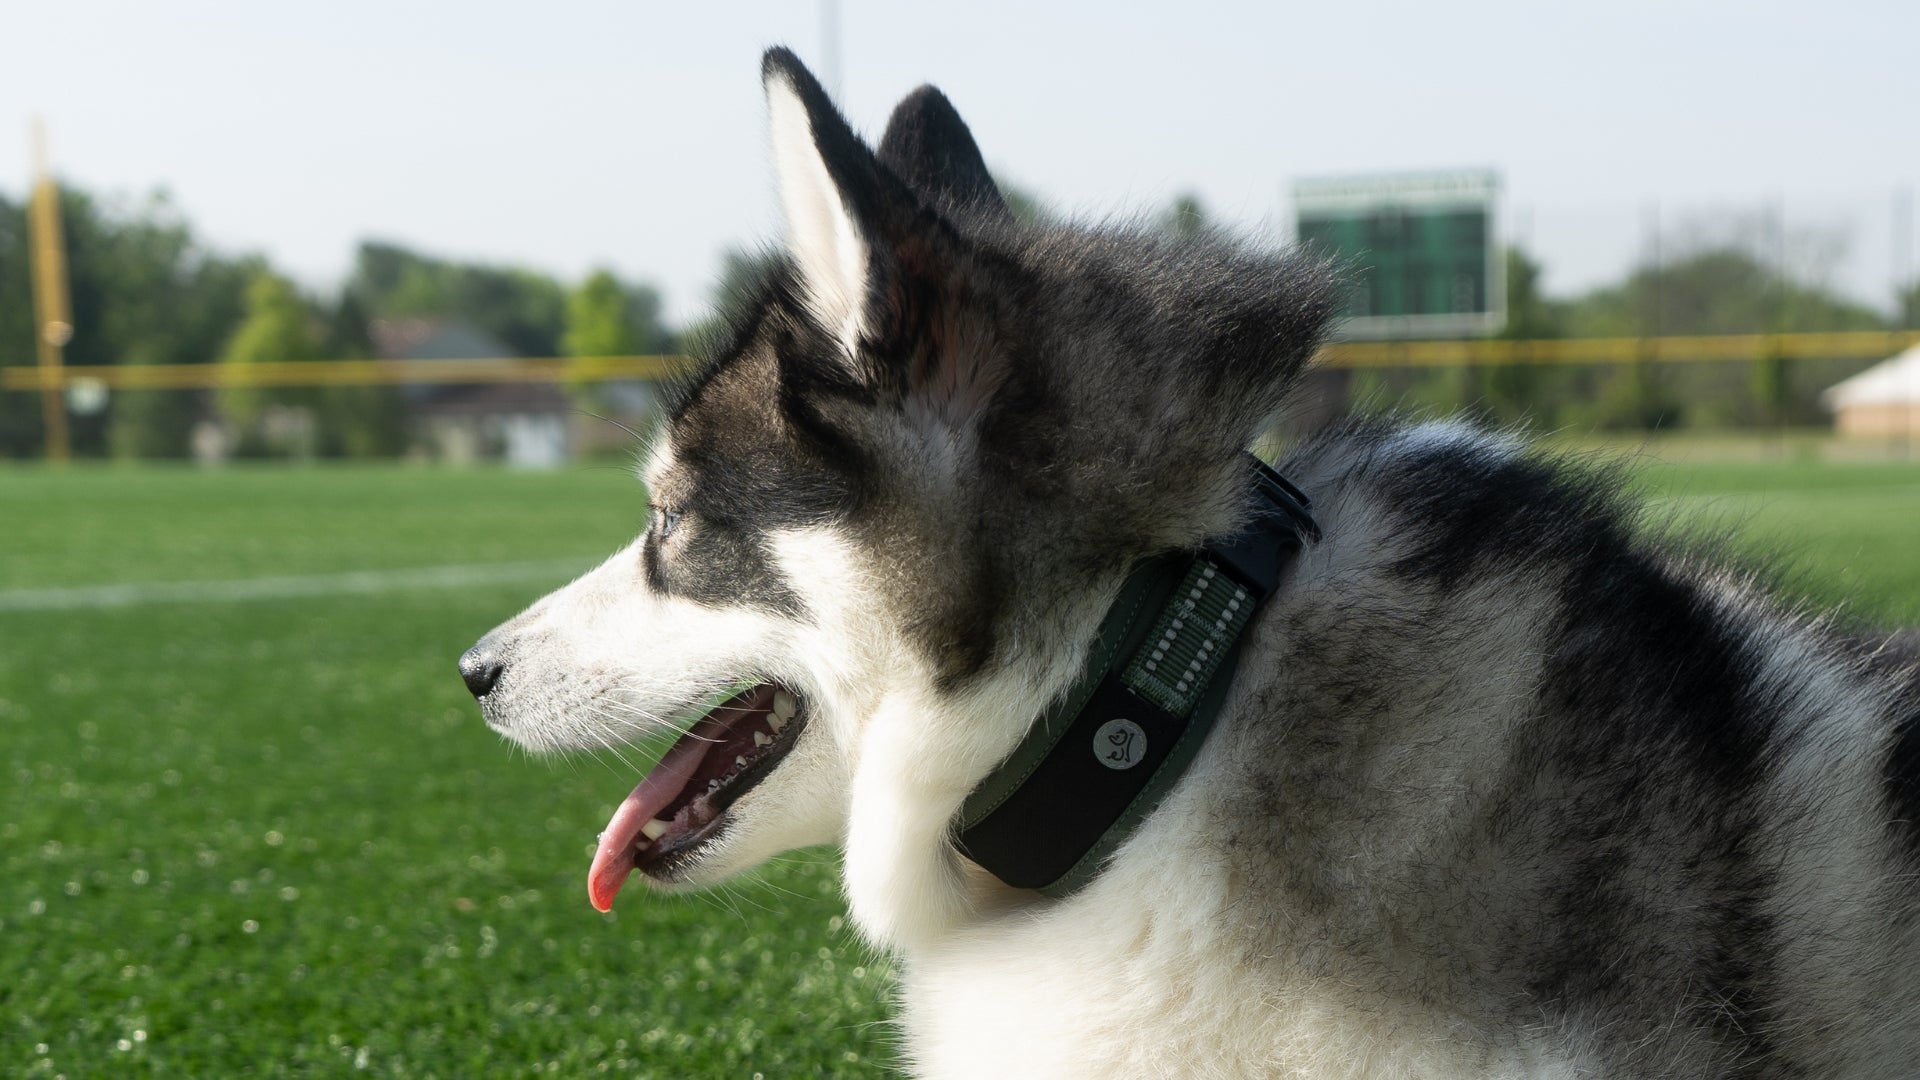 Dog at the park wearing a Green Air Mesh dog collar; side view showing 3M reflective stitching & Waggy logo